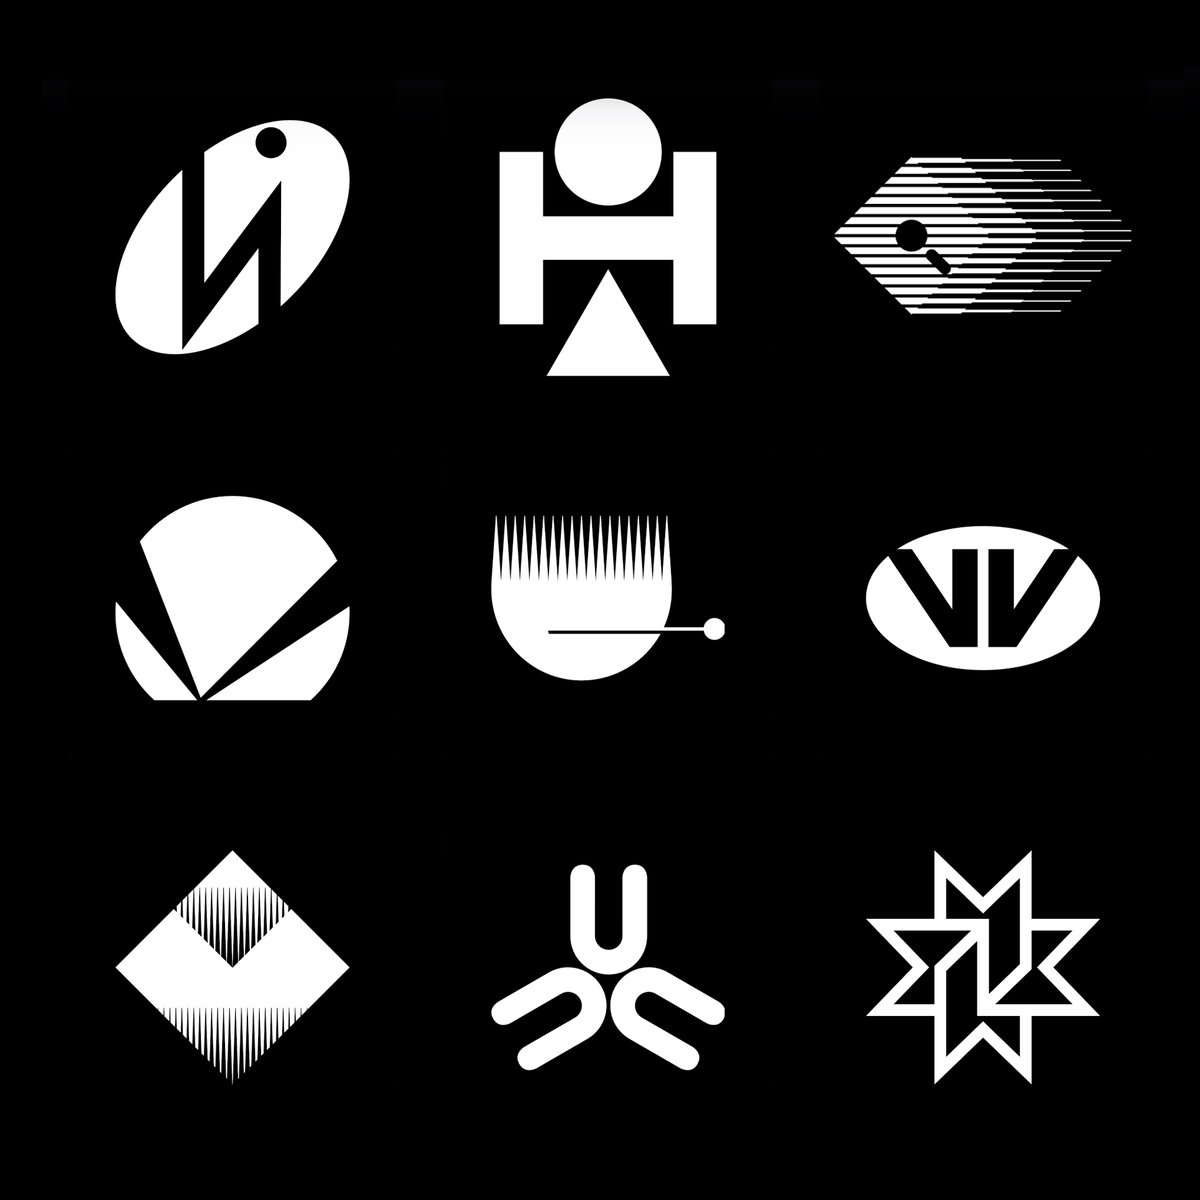 The latest historical logos digitised and added to LogoArchive over the last two weeks. See over 4000 more at logo-archive.org